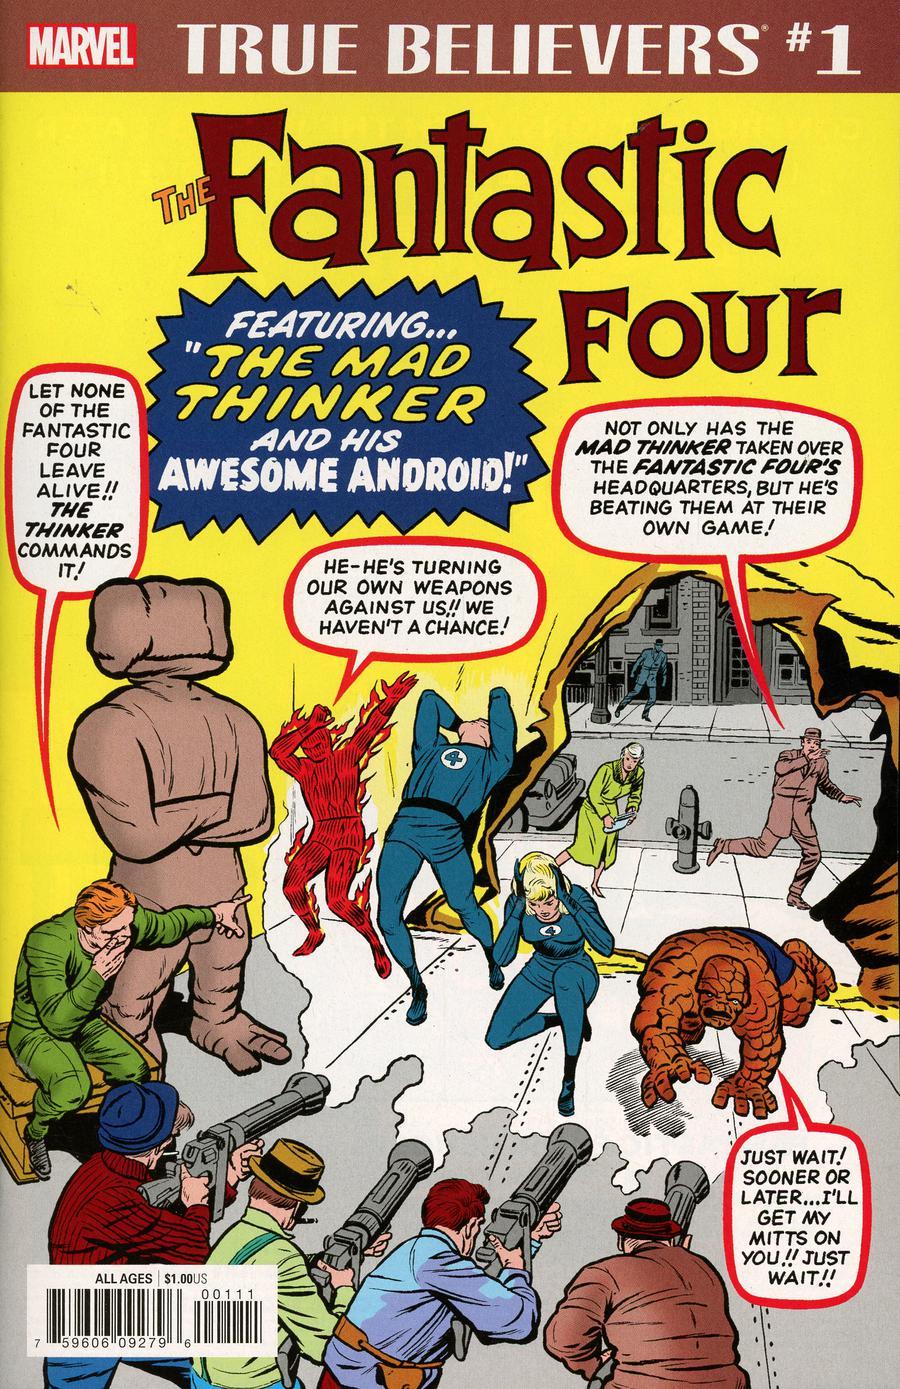 True Believers Fantastic Four Mad Thinker And Awesome Droid Vol. 1 #1